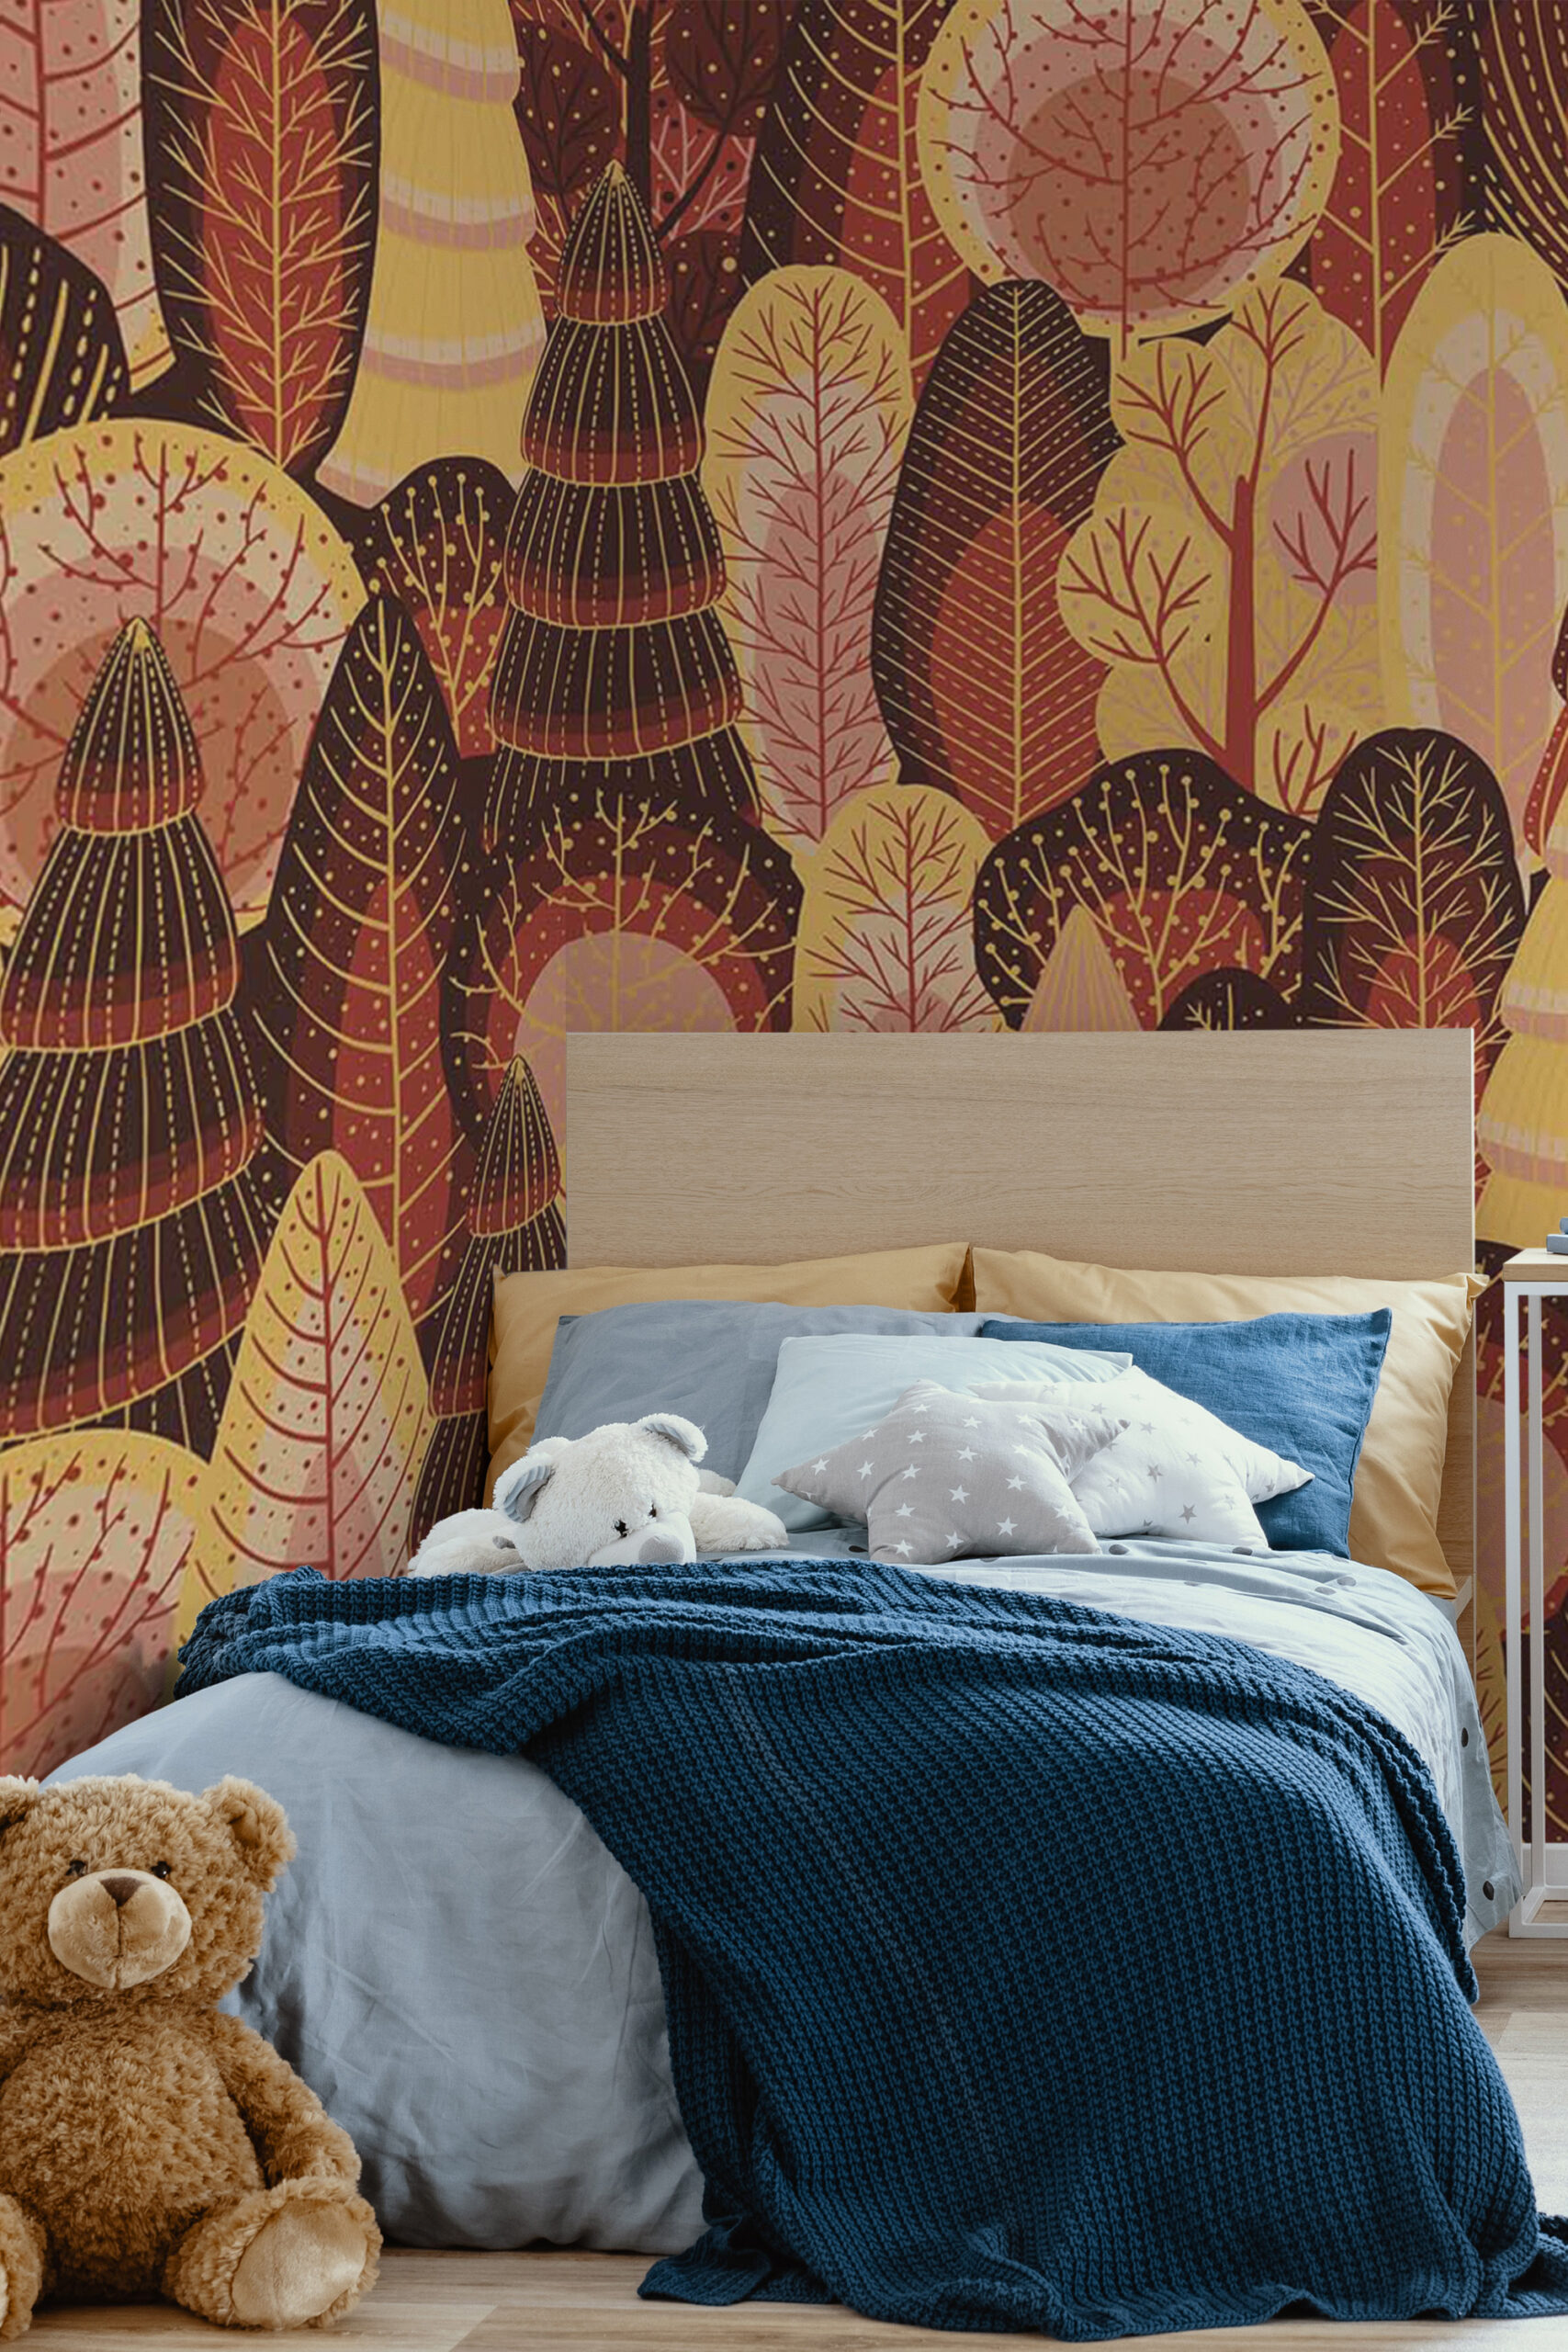 Removable wall mural showcasing Autumn's beauty by Fancy Walls